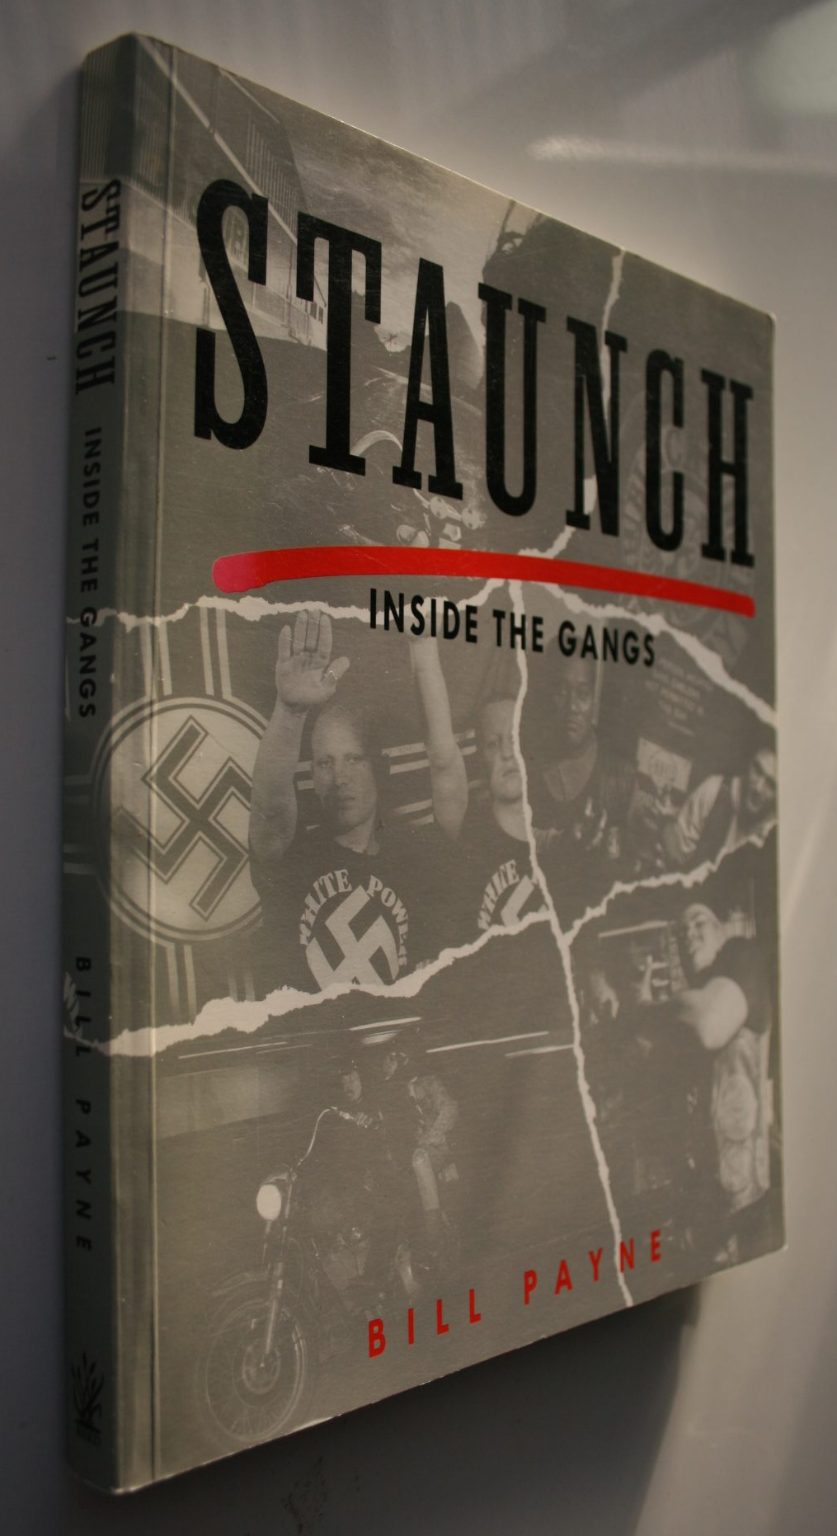 Staunch. Inside New Zealand's Gangs by Bill Payne. First Edition. VERY SCARCE.